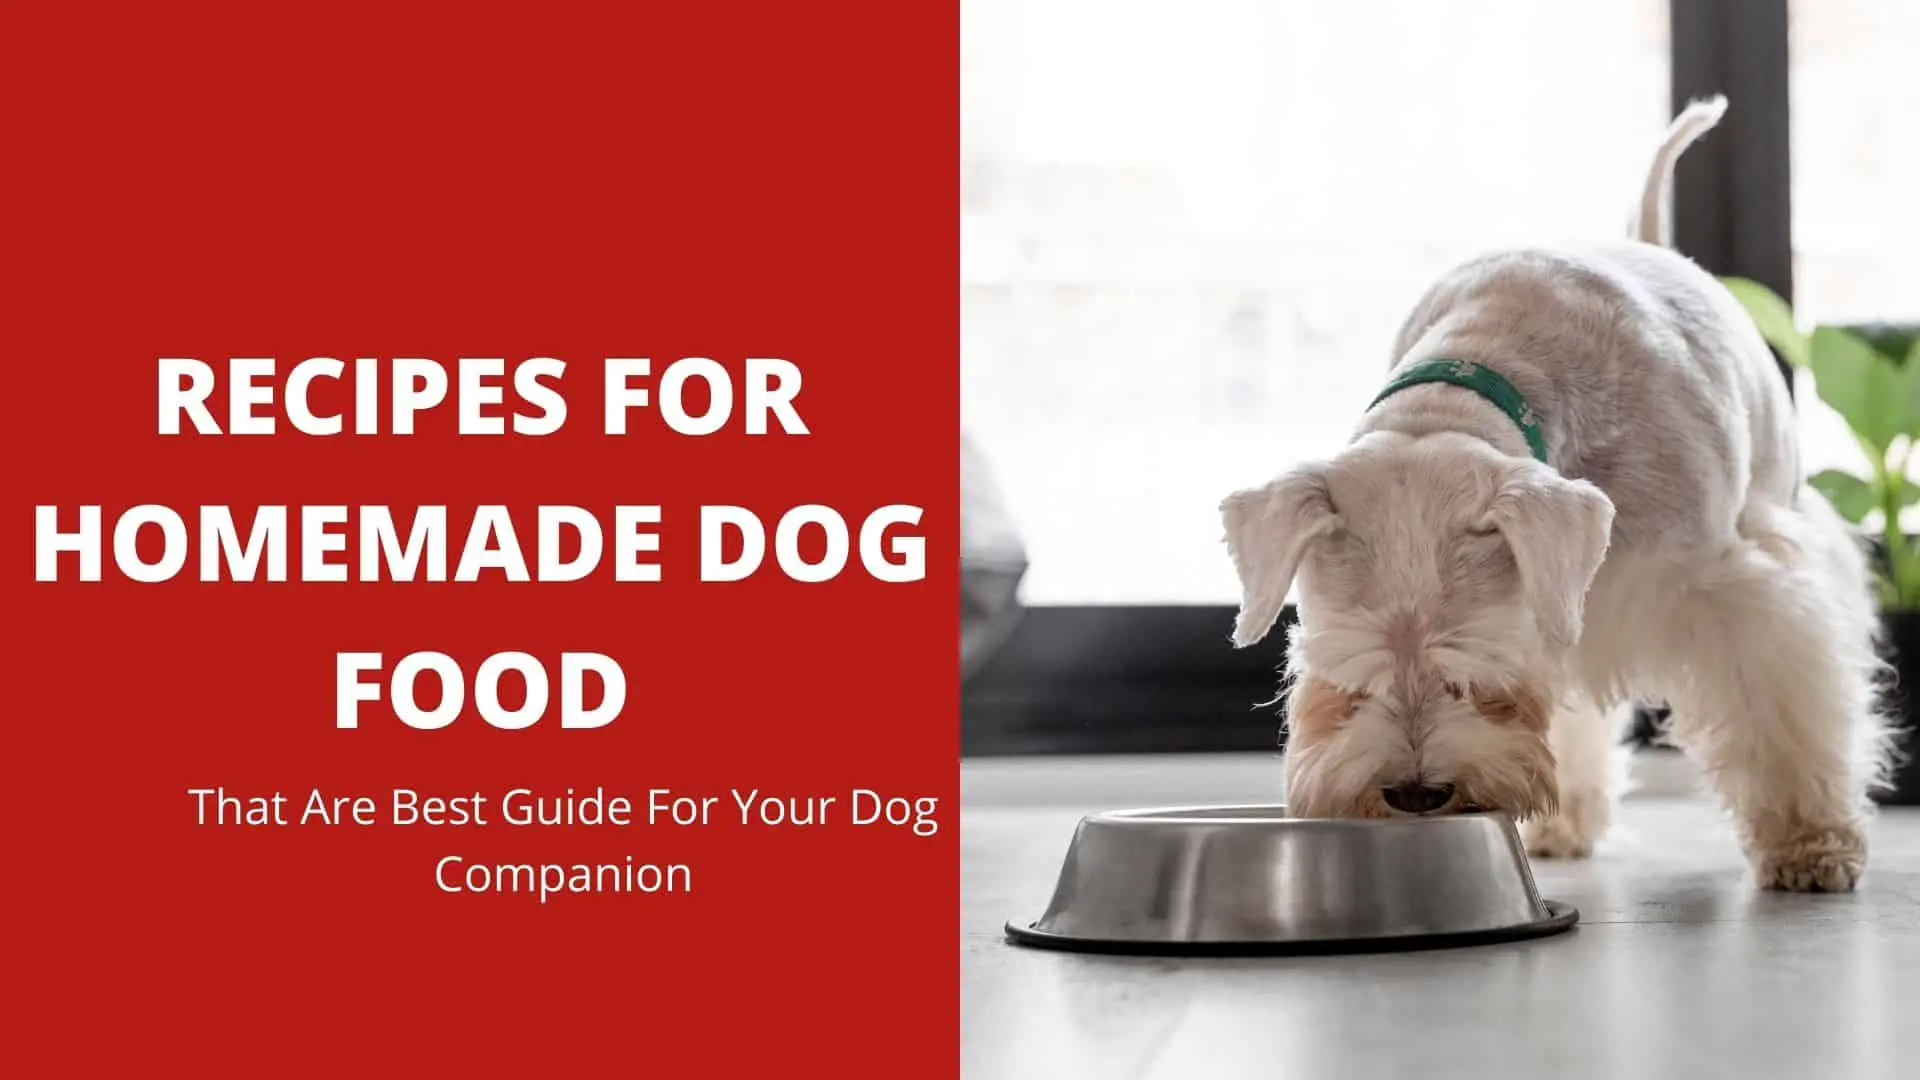 Recipes For Homemade Dog Food That Are Best Guide For Your Dog Companion 2022